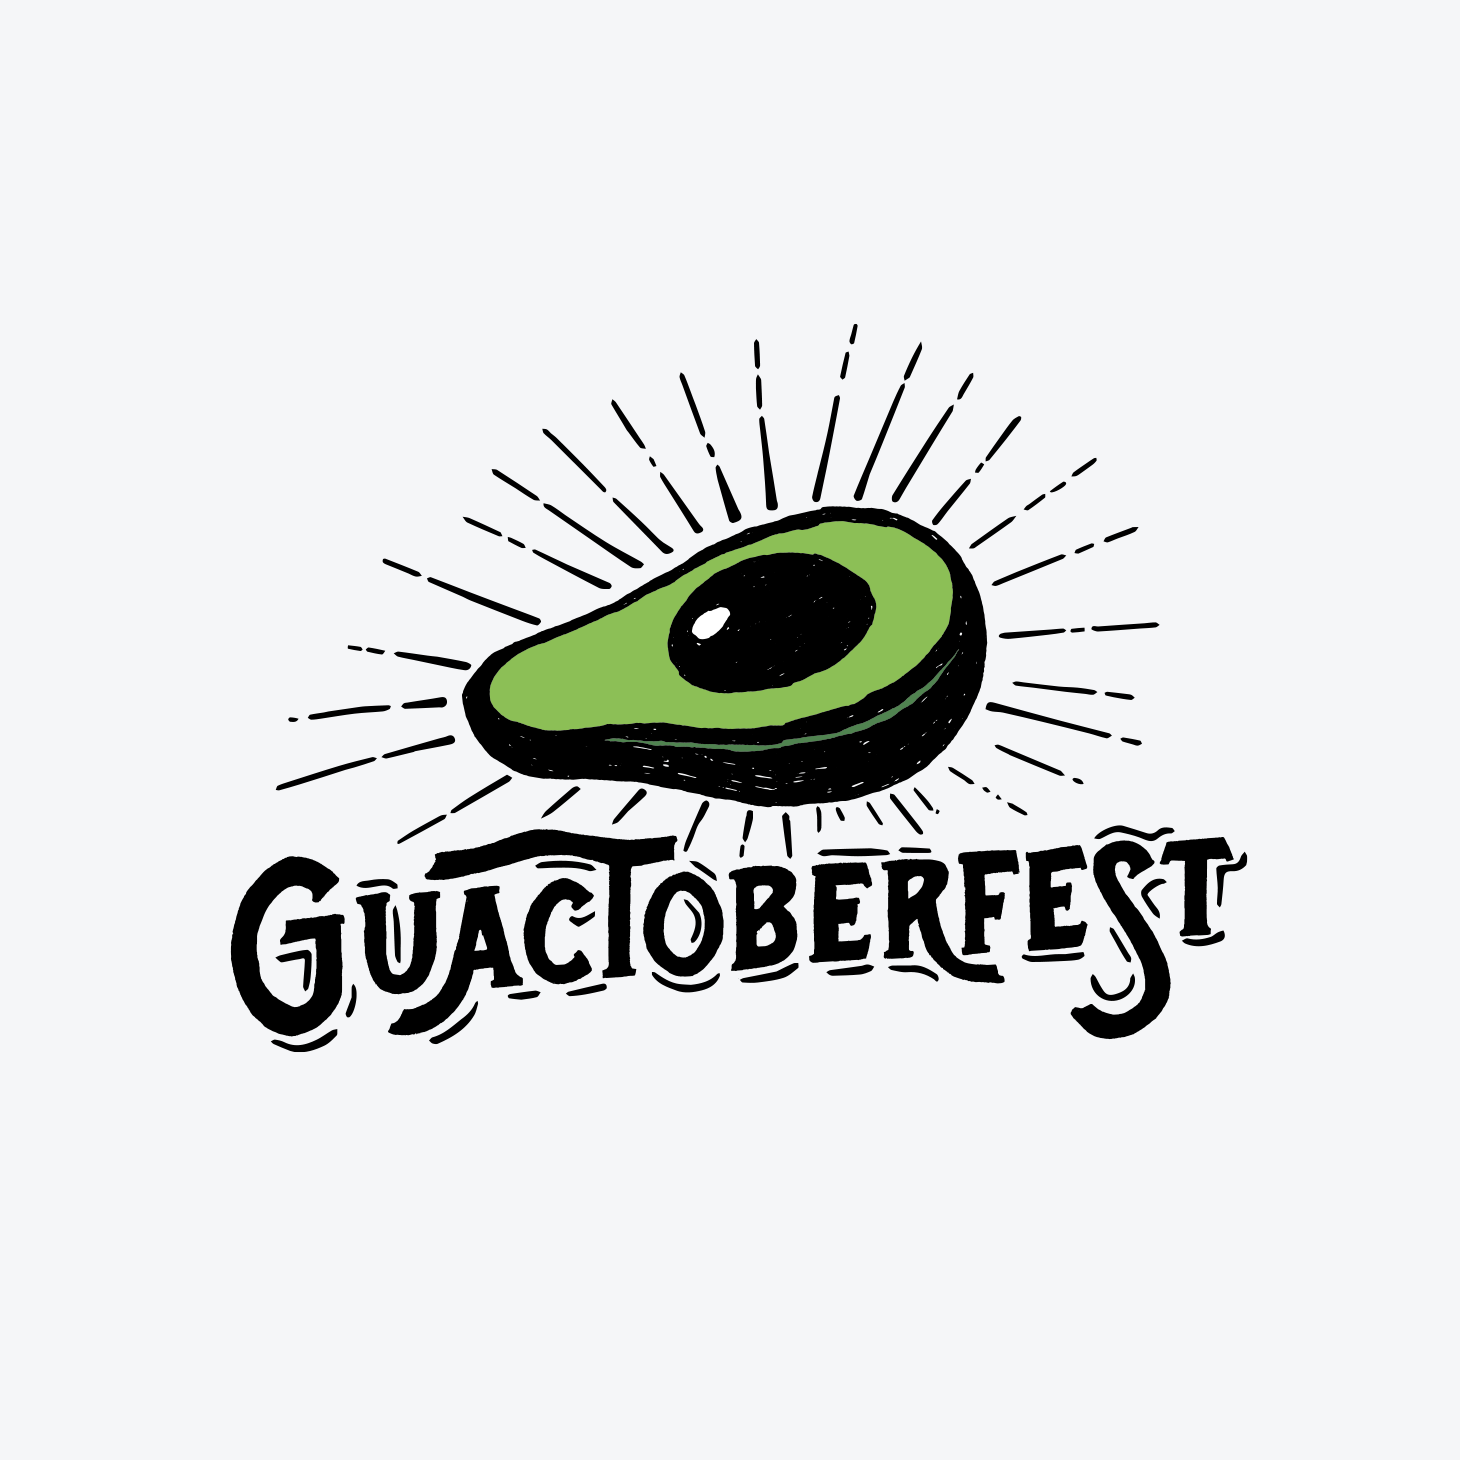 Logo design for Chevy's Guactoberfest